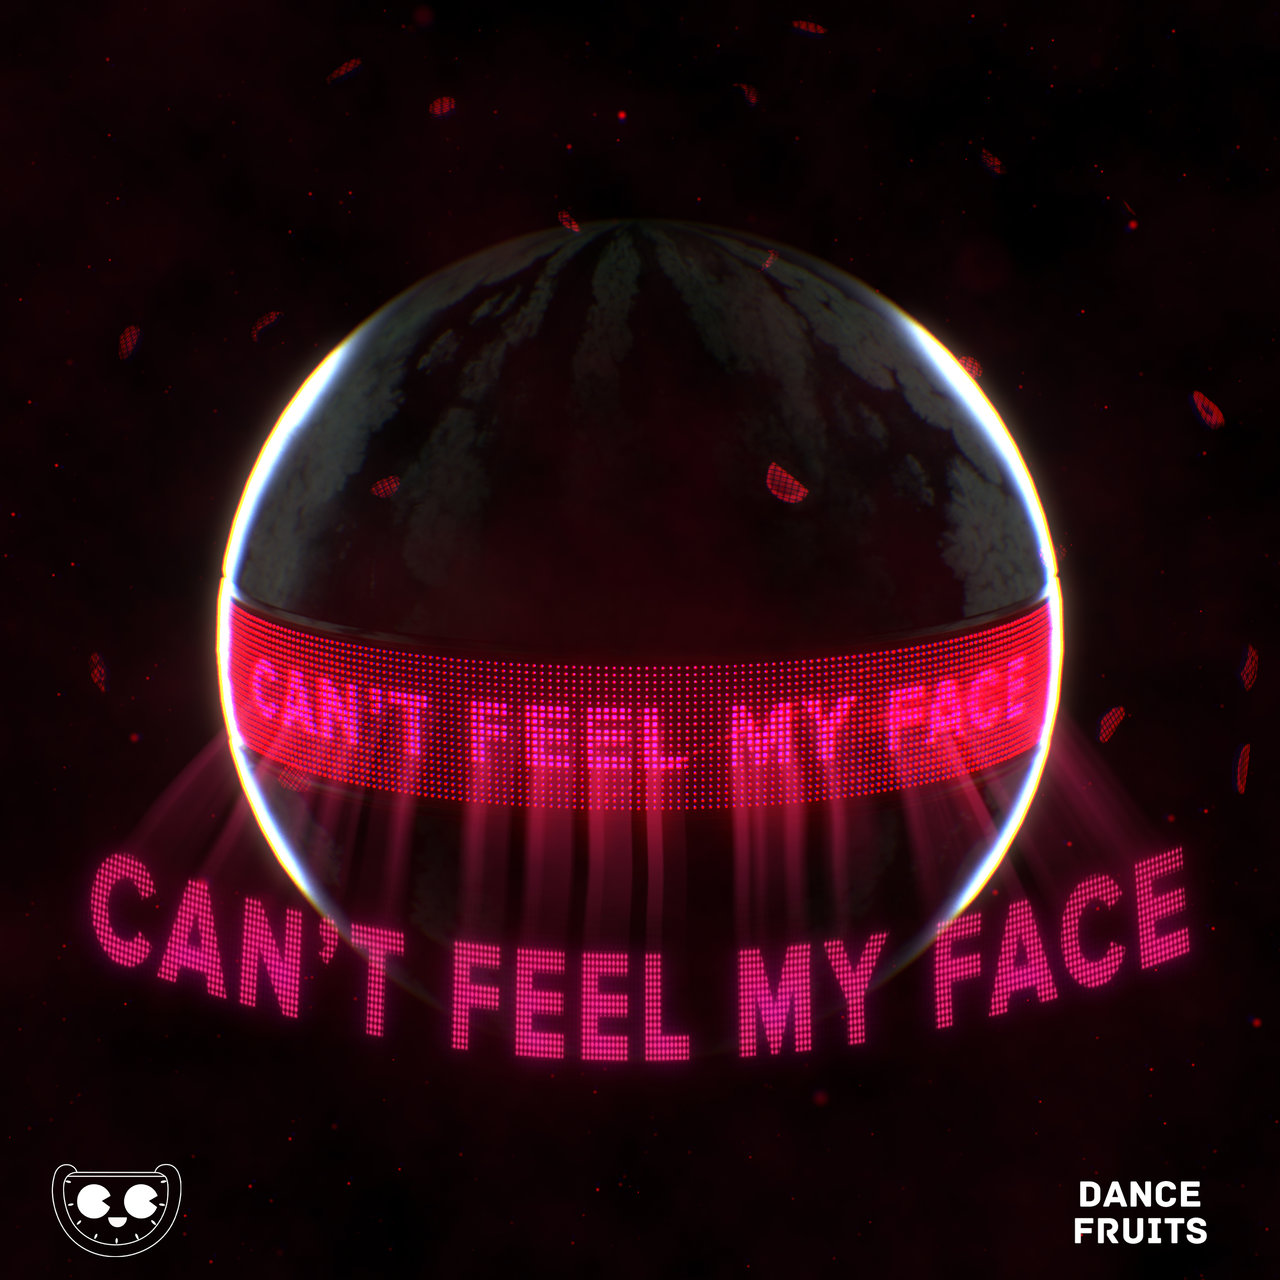 Steve Void & Dance Fruits Music ft. featuring Ember Island Can&#039;t Feel My Face cover artwork